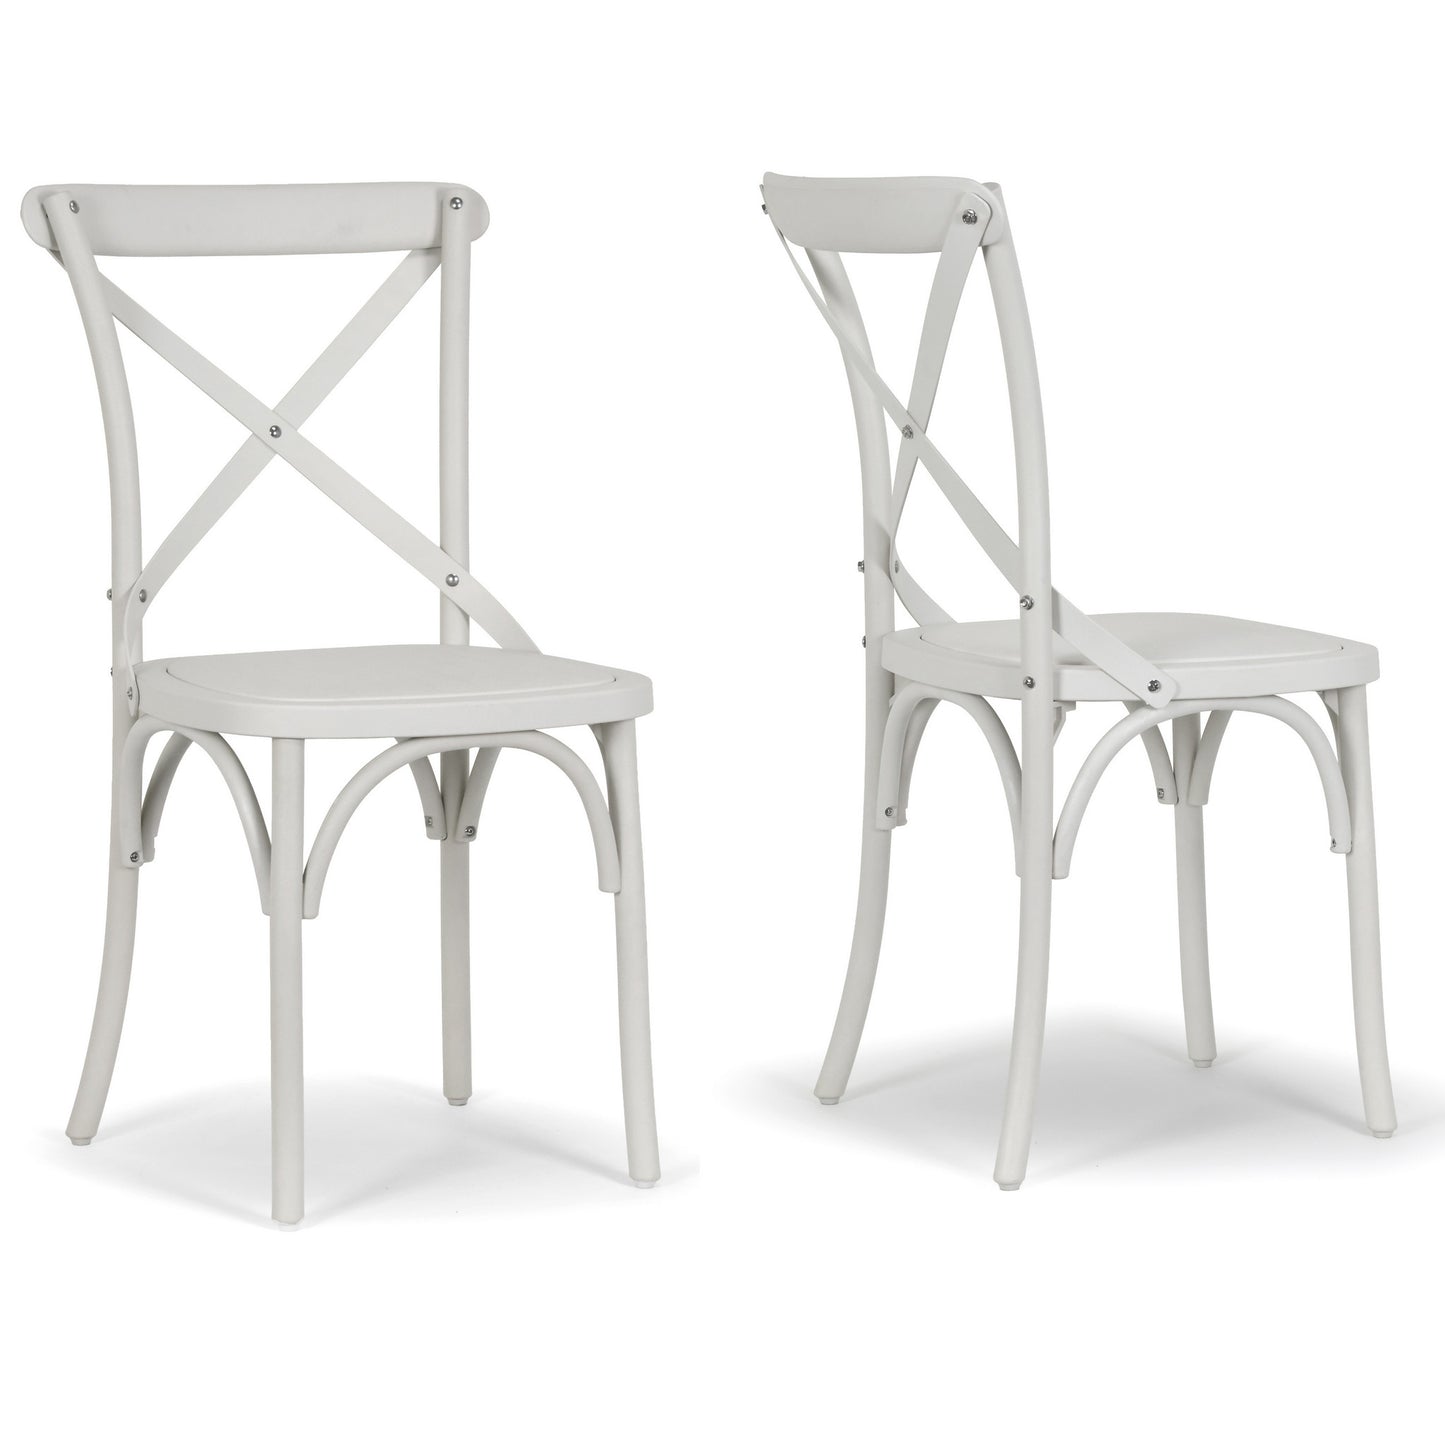 Set of 2 Aleah Outdoor Indoor Dining Chair Cross Back Chairs in White